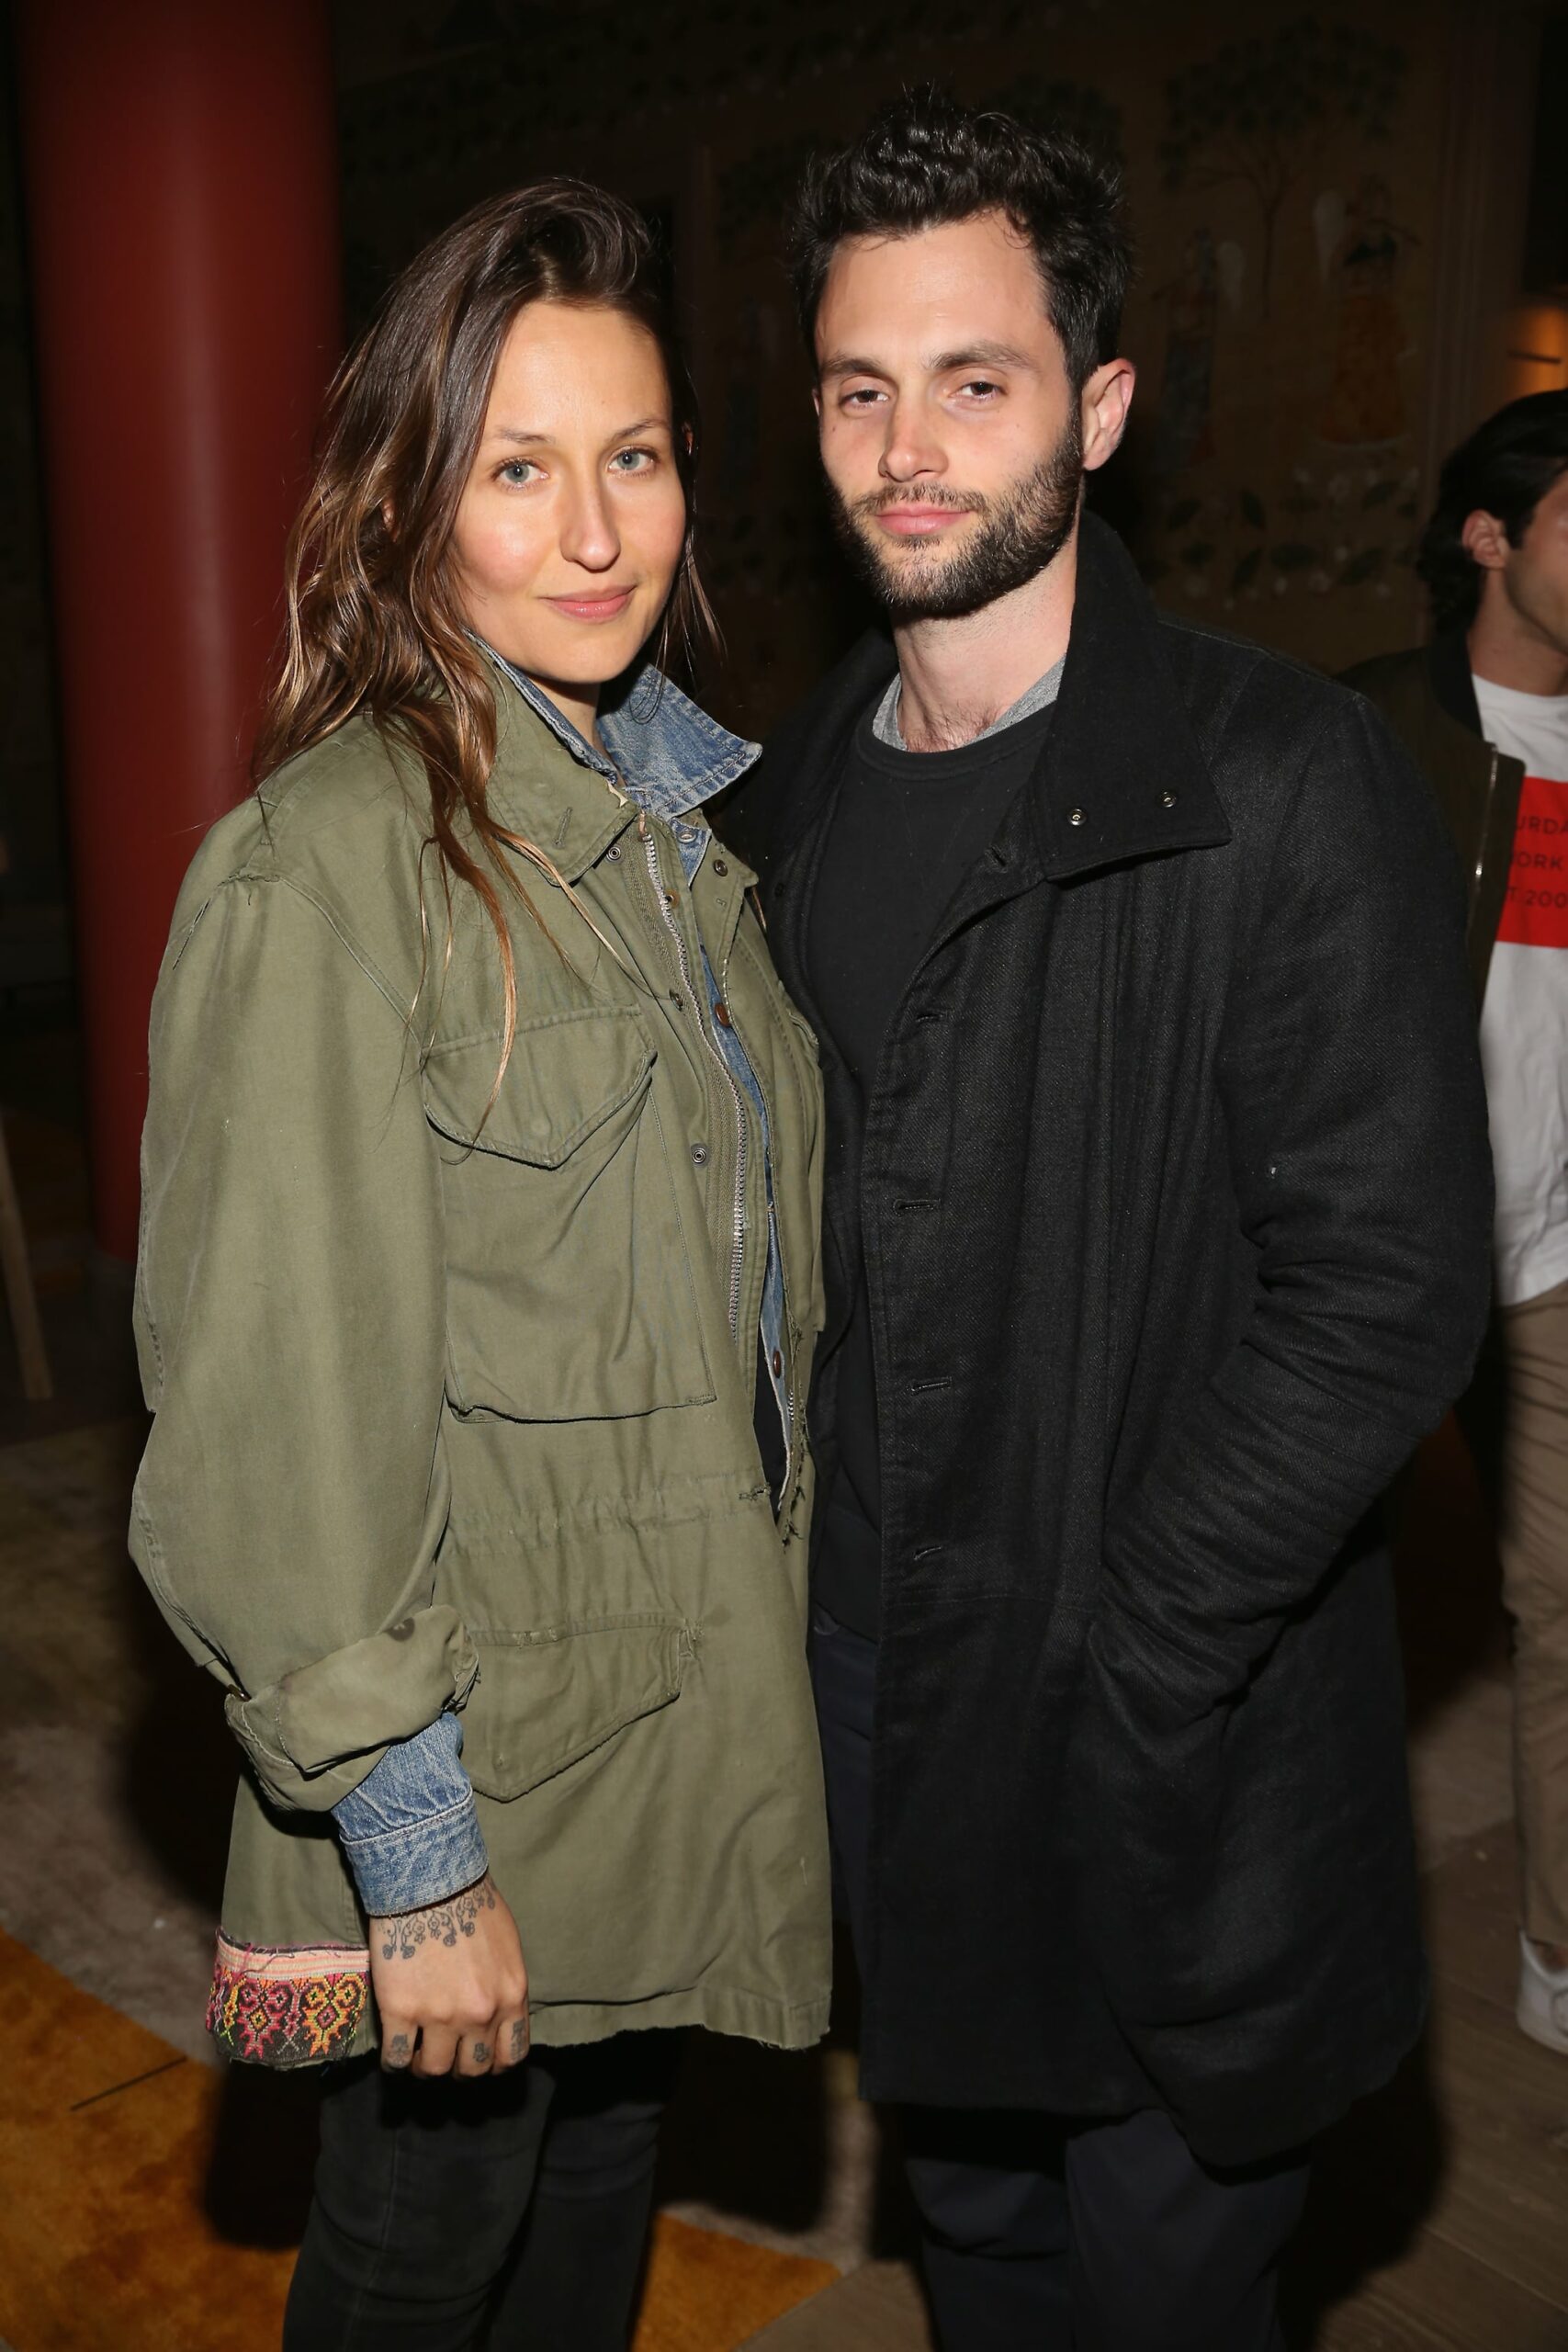 NEW YORK, NY - APRIL 30: Domino Kirke and Penn Badgley attend The Weinstein Company and Lyft host a special screening of